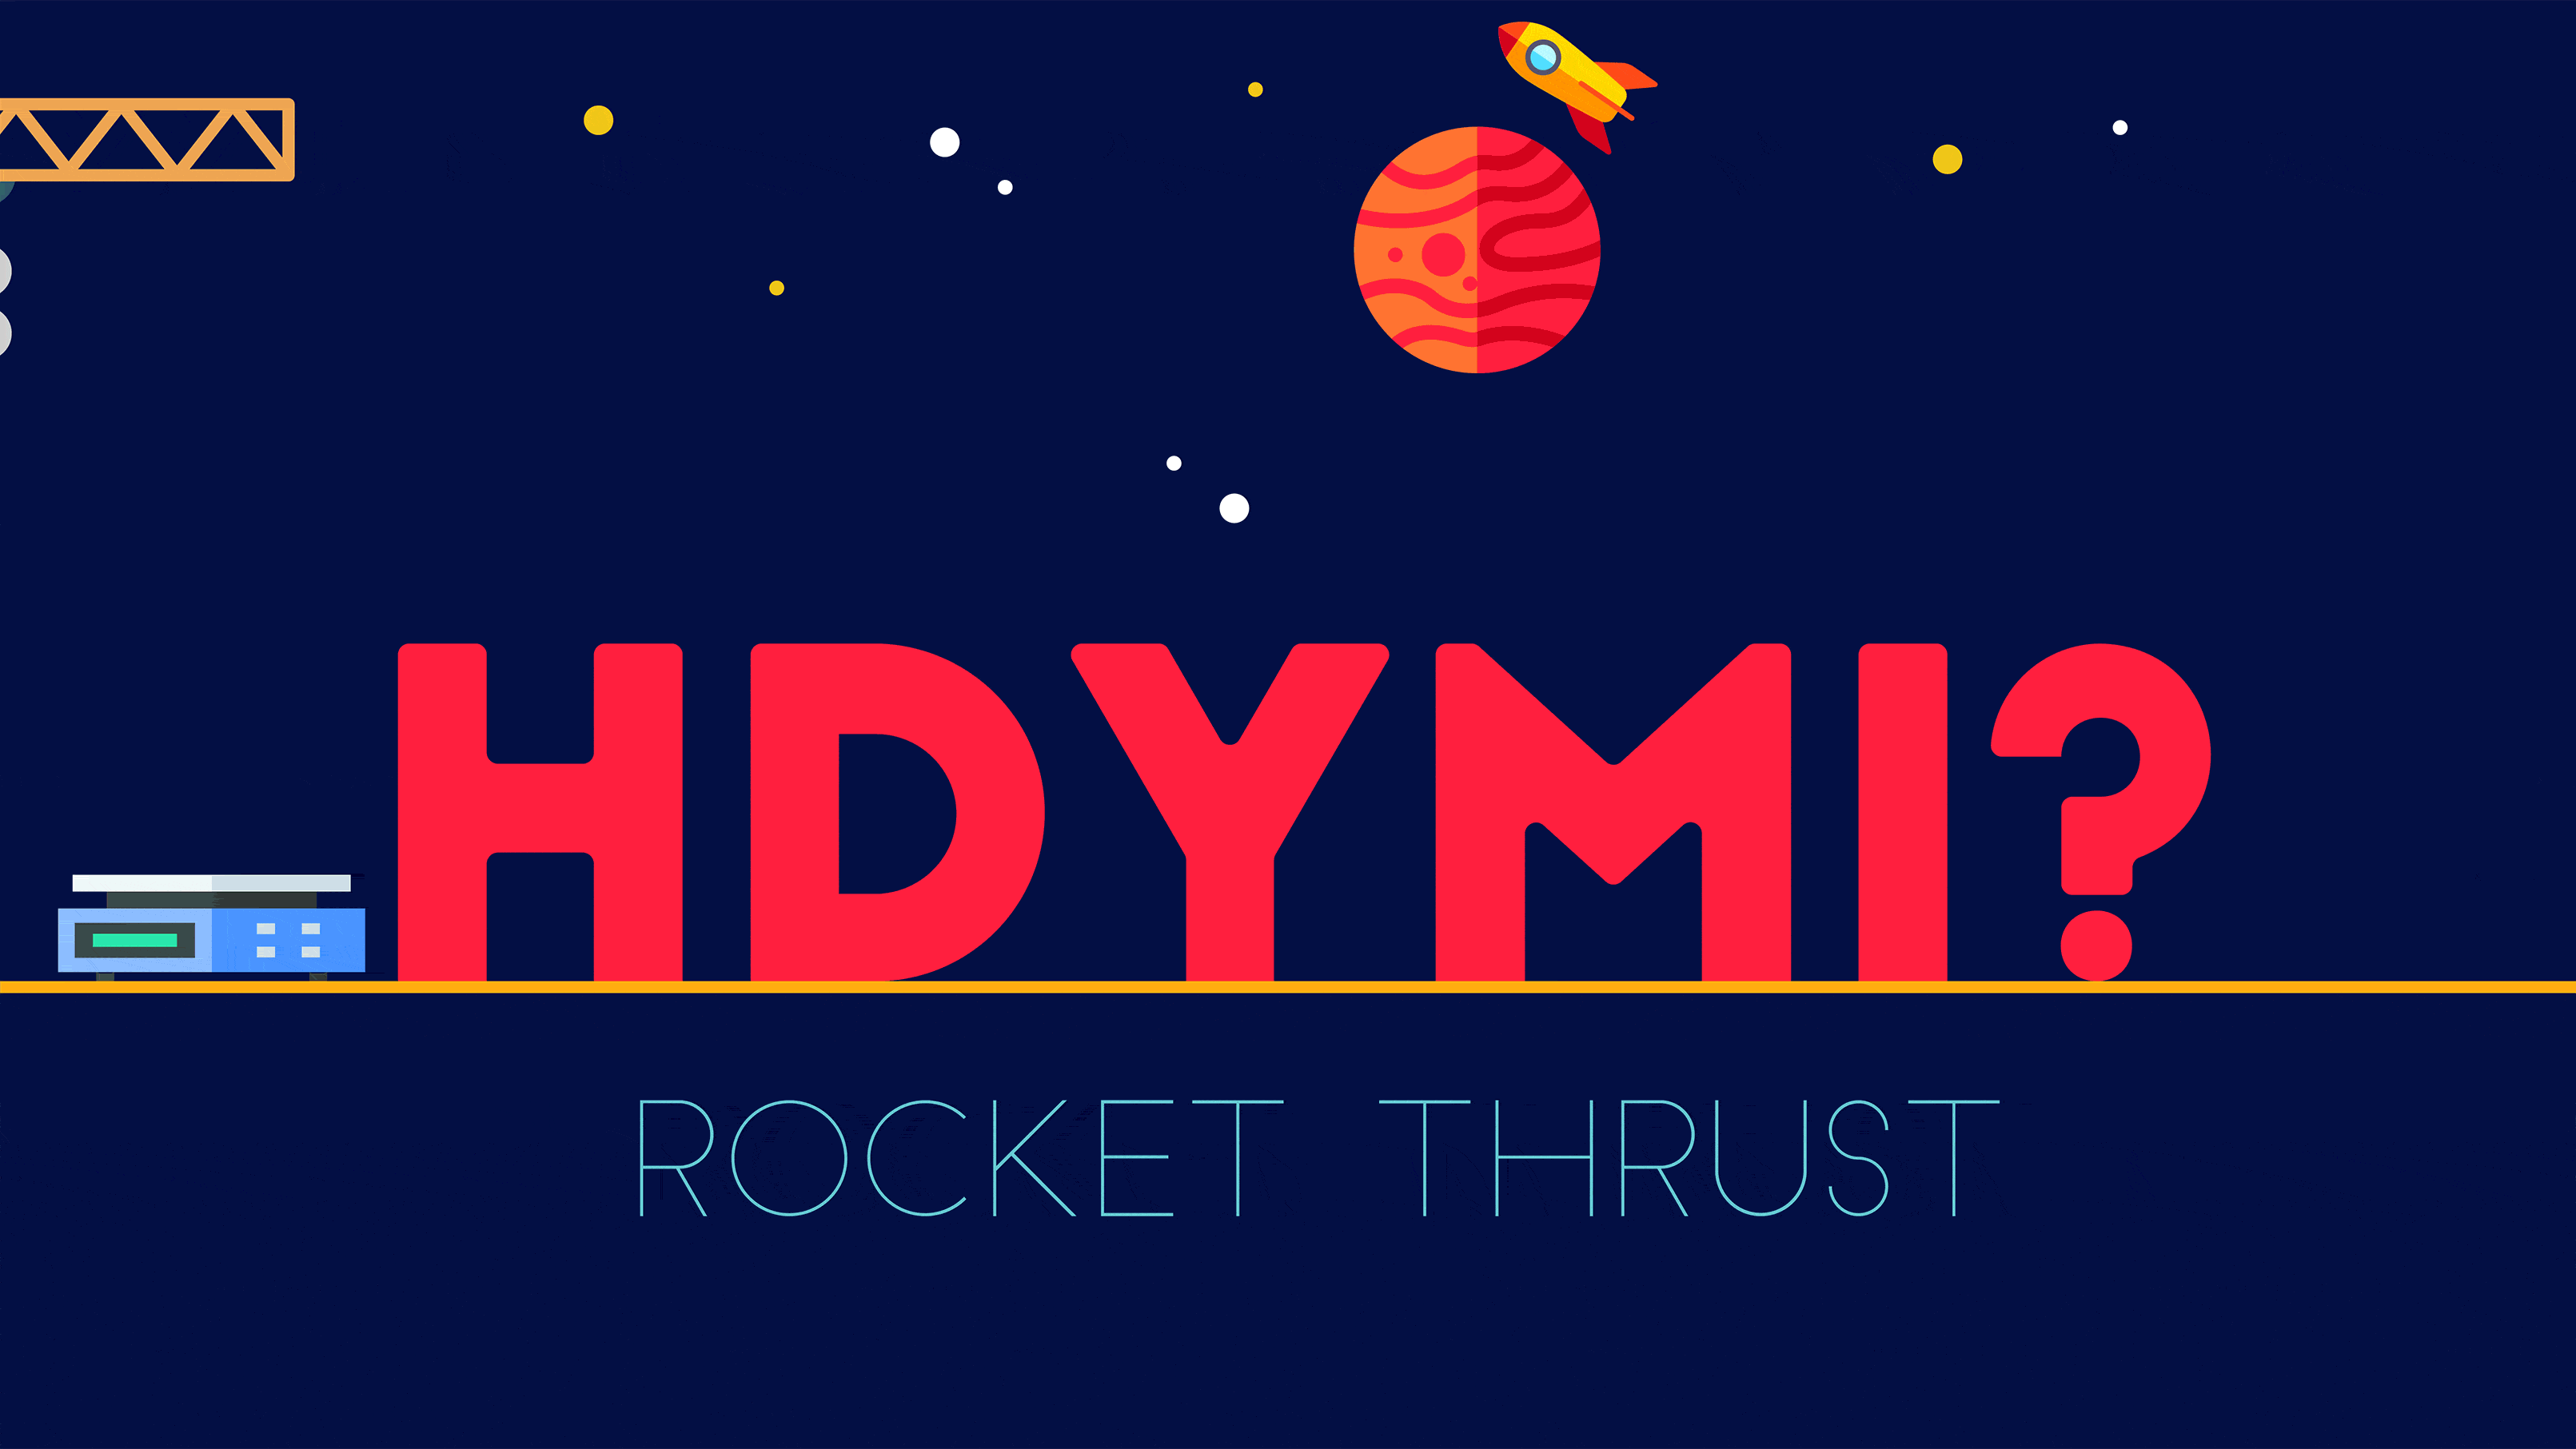 Animated illustration shows rockets moving in outer space, along with a stack of weights and the wording "HDYMI? Rocket Thrust."